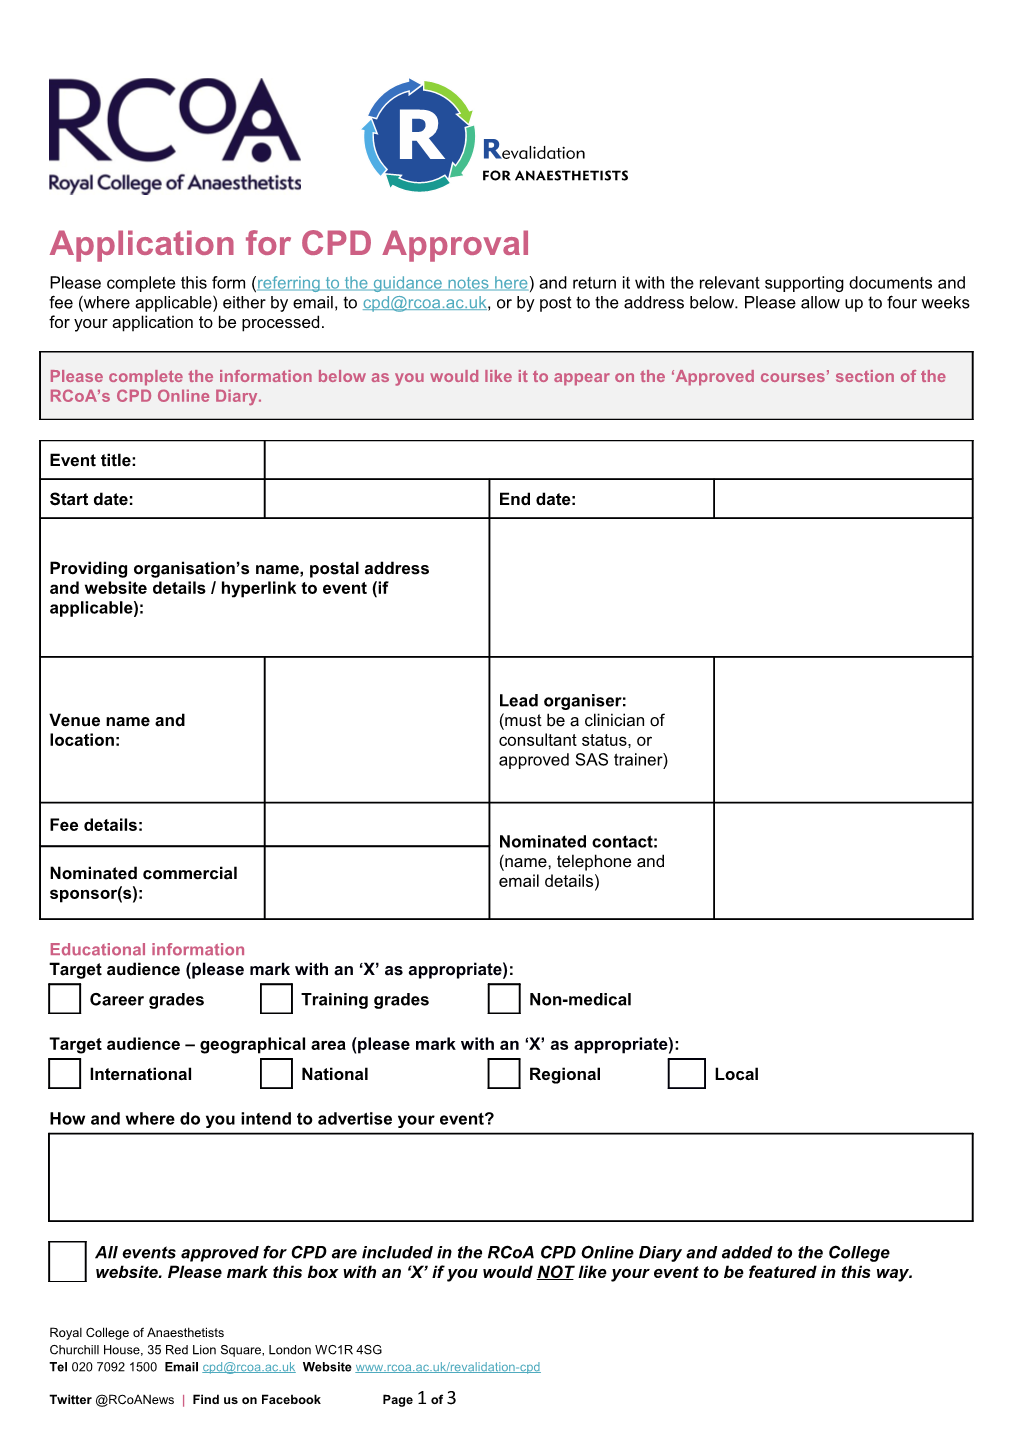 Application for CPD Approval